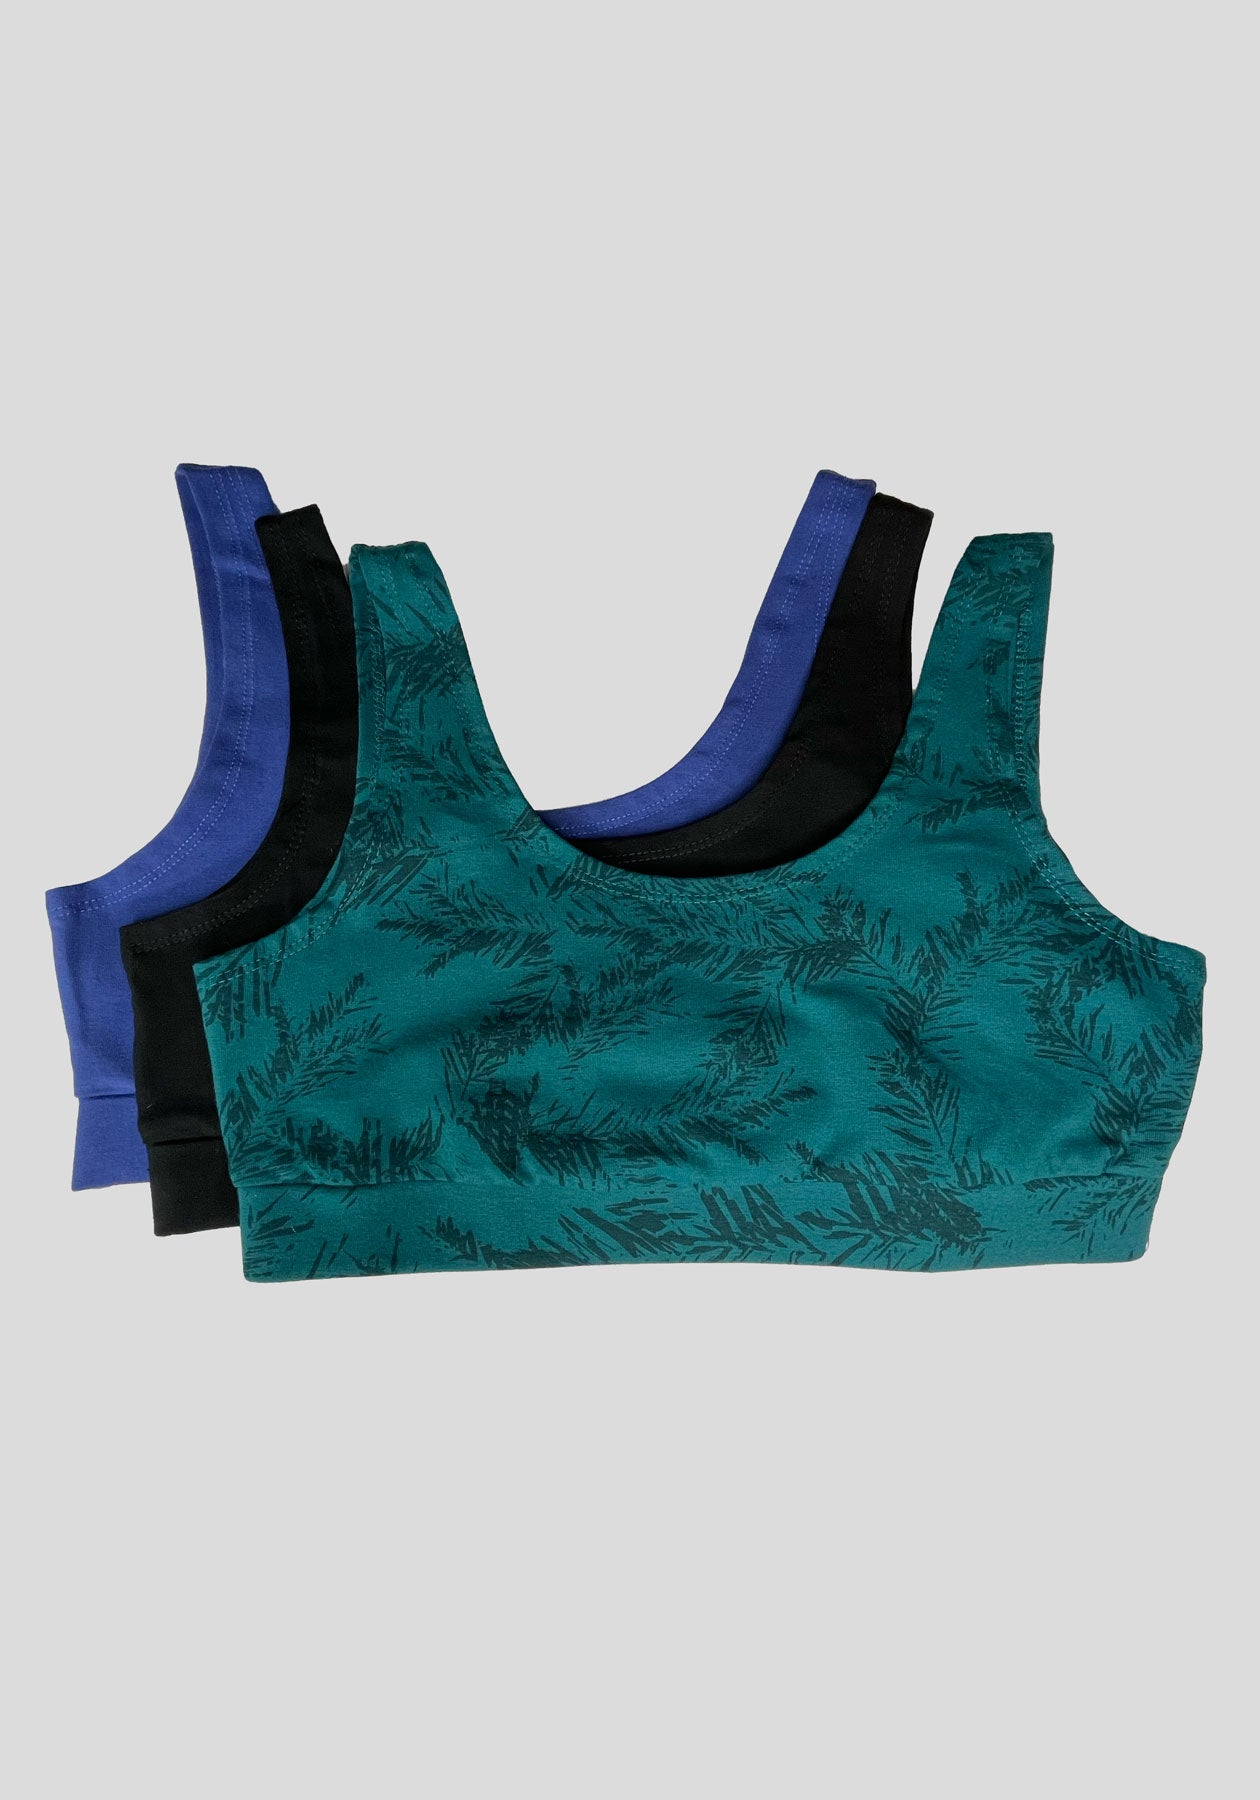 Cotton Blend A Sports Bras for Women for sale